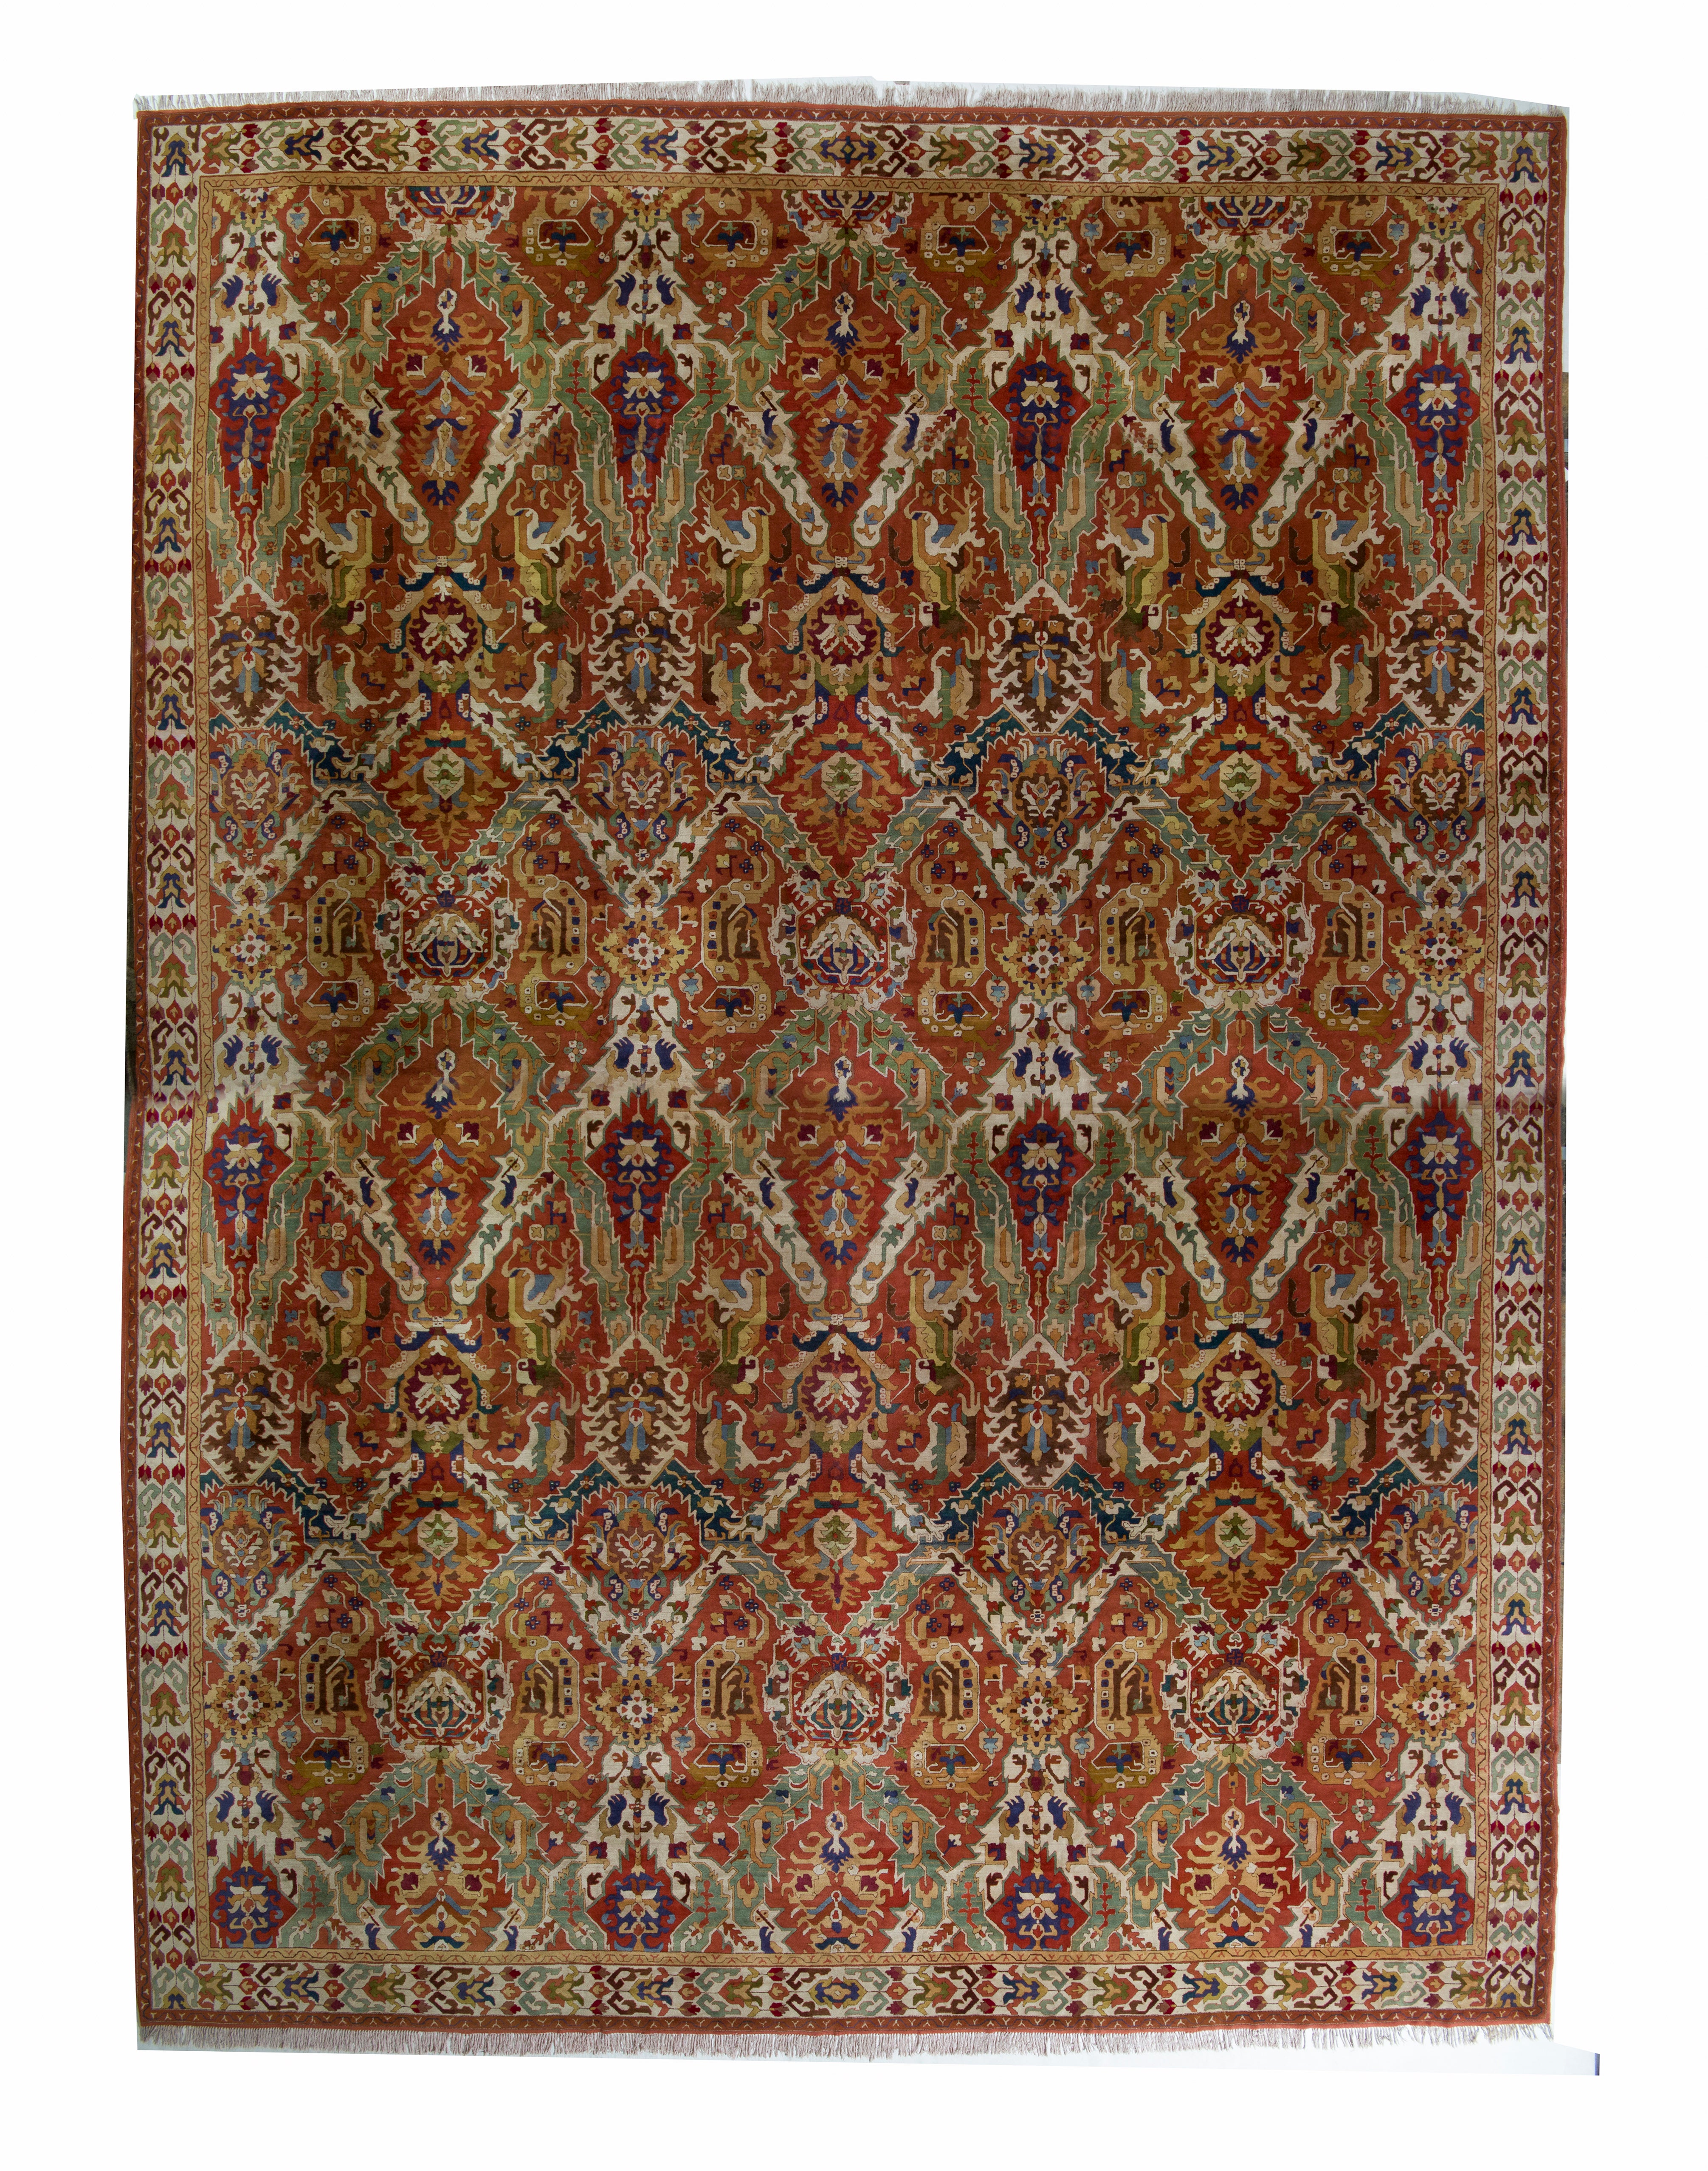 Hand-Hooked Antique Rug in Red and Green All Over Floral Pattern For Sale